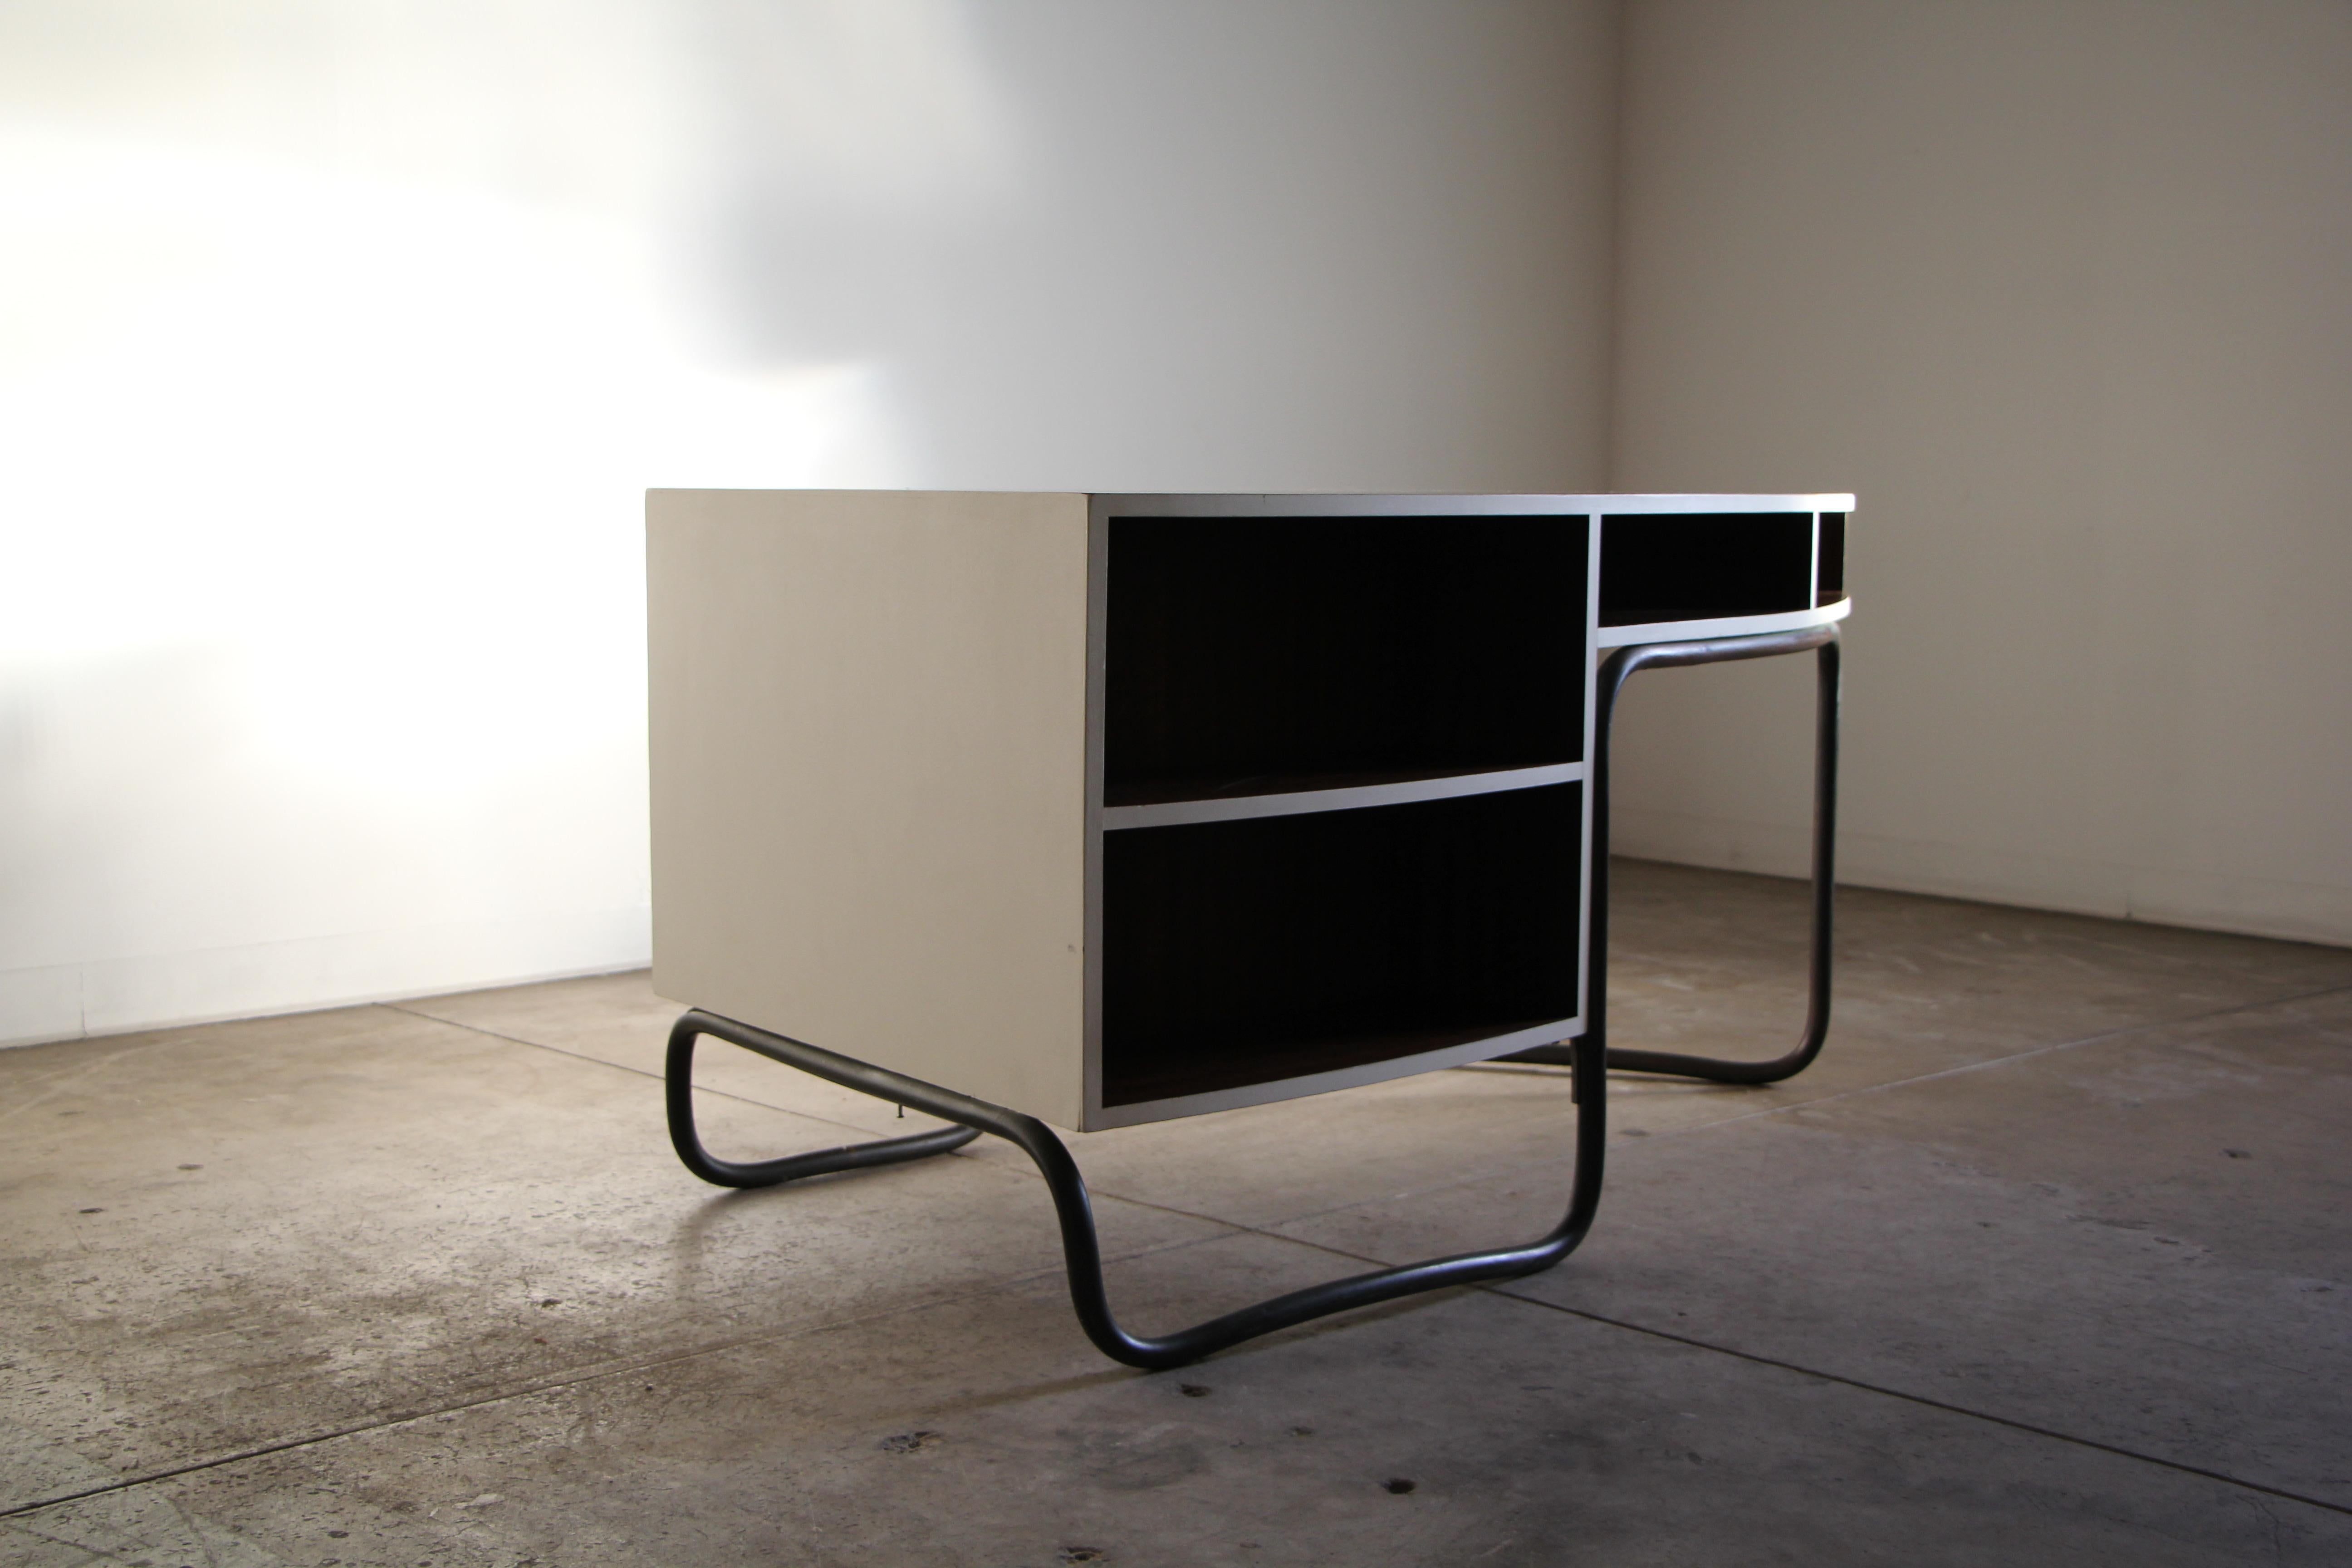 Bauhaus Serge Chermayeff One-of-a-Kind Curved Desk from the BBC Building 1930s For Sale